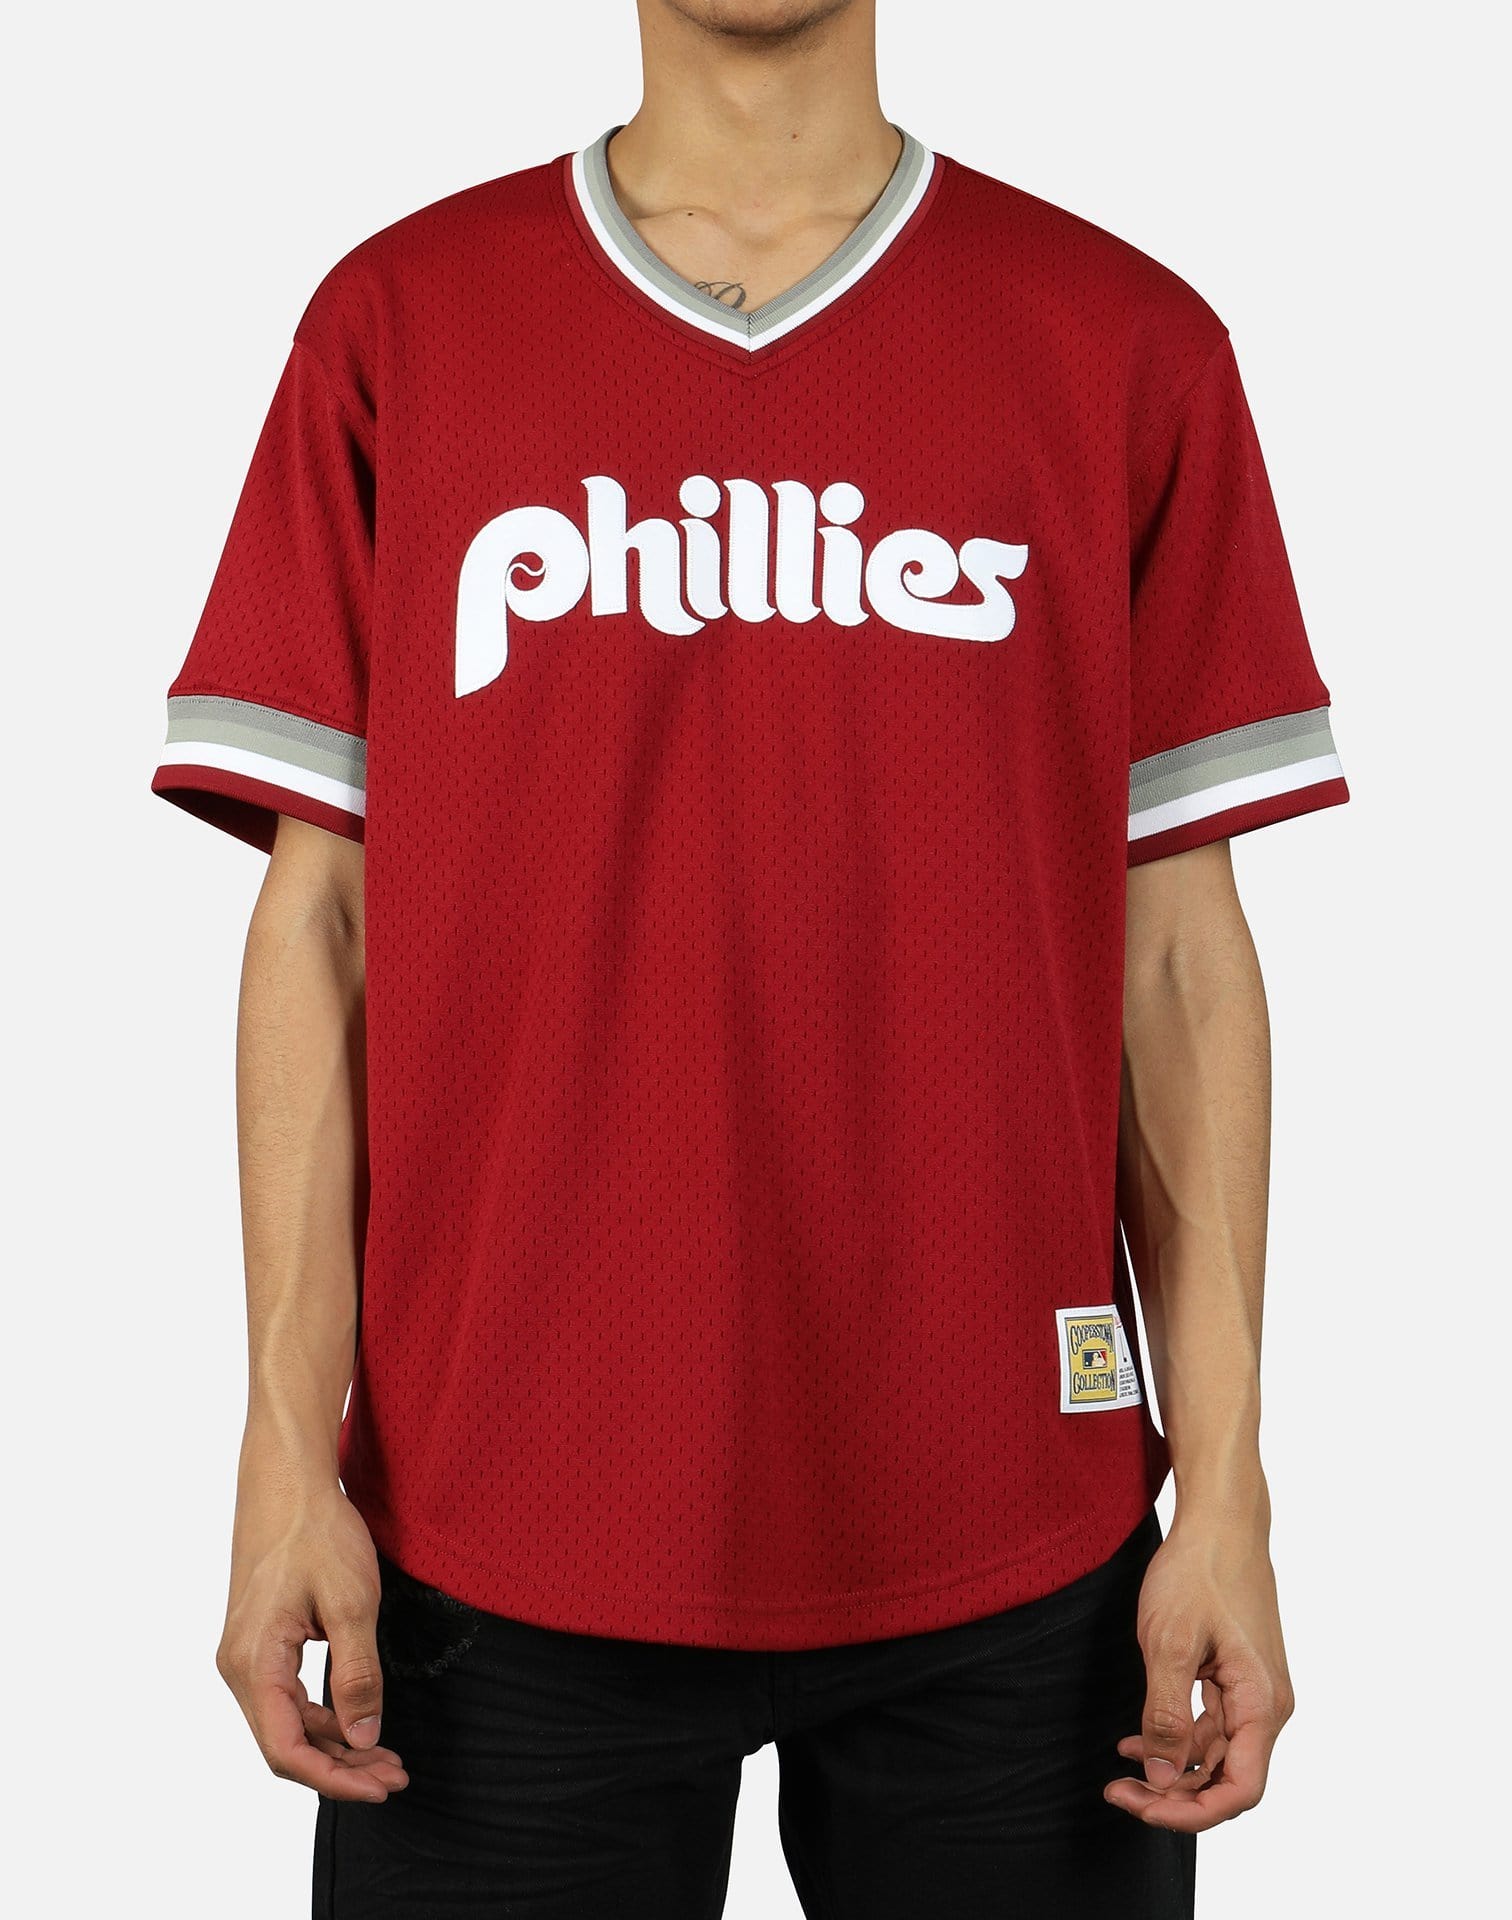 Report: Phillies remove sleeve numbers to make way for jersey ad